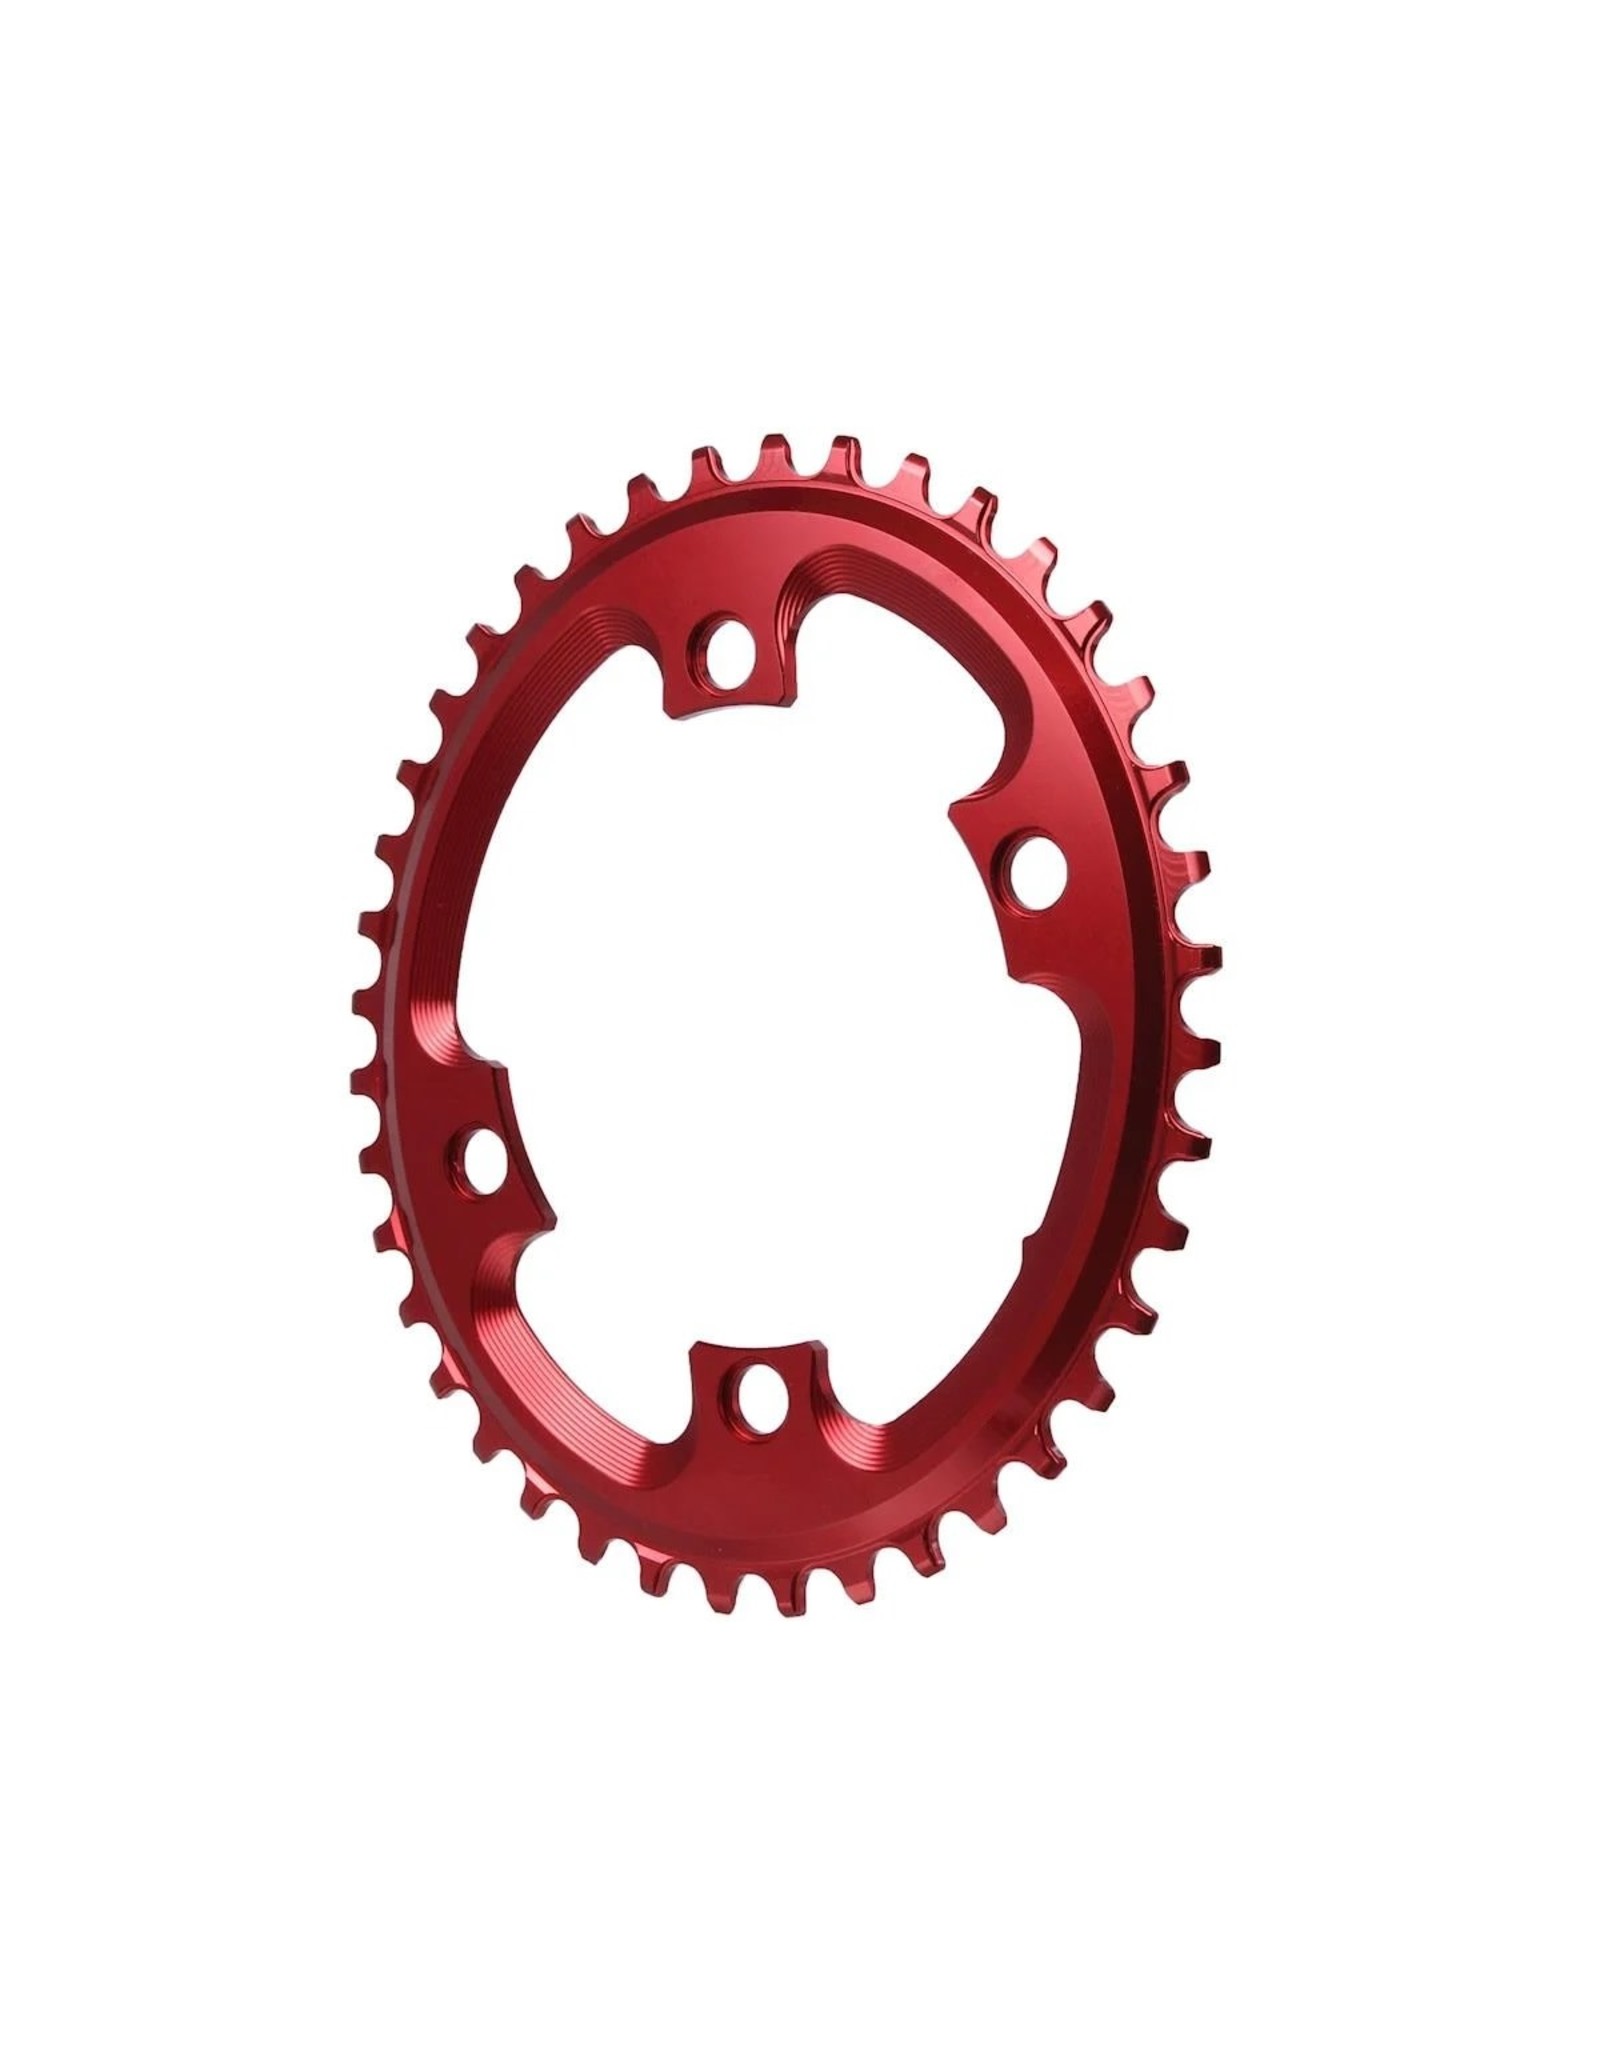 Absolute Black ABSOLUTE BLACK, Oval, CX  n/w, 110/4 asymmetric bcd, Chainring, Red, 40T